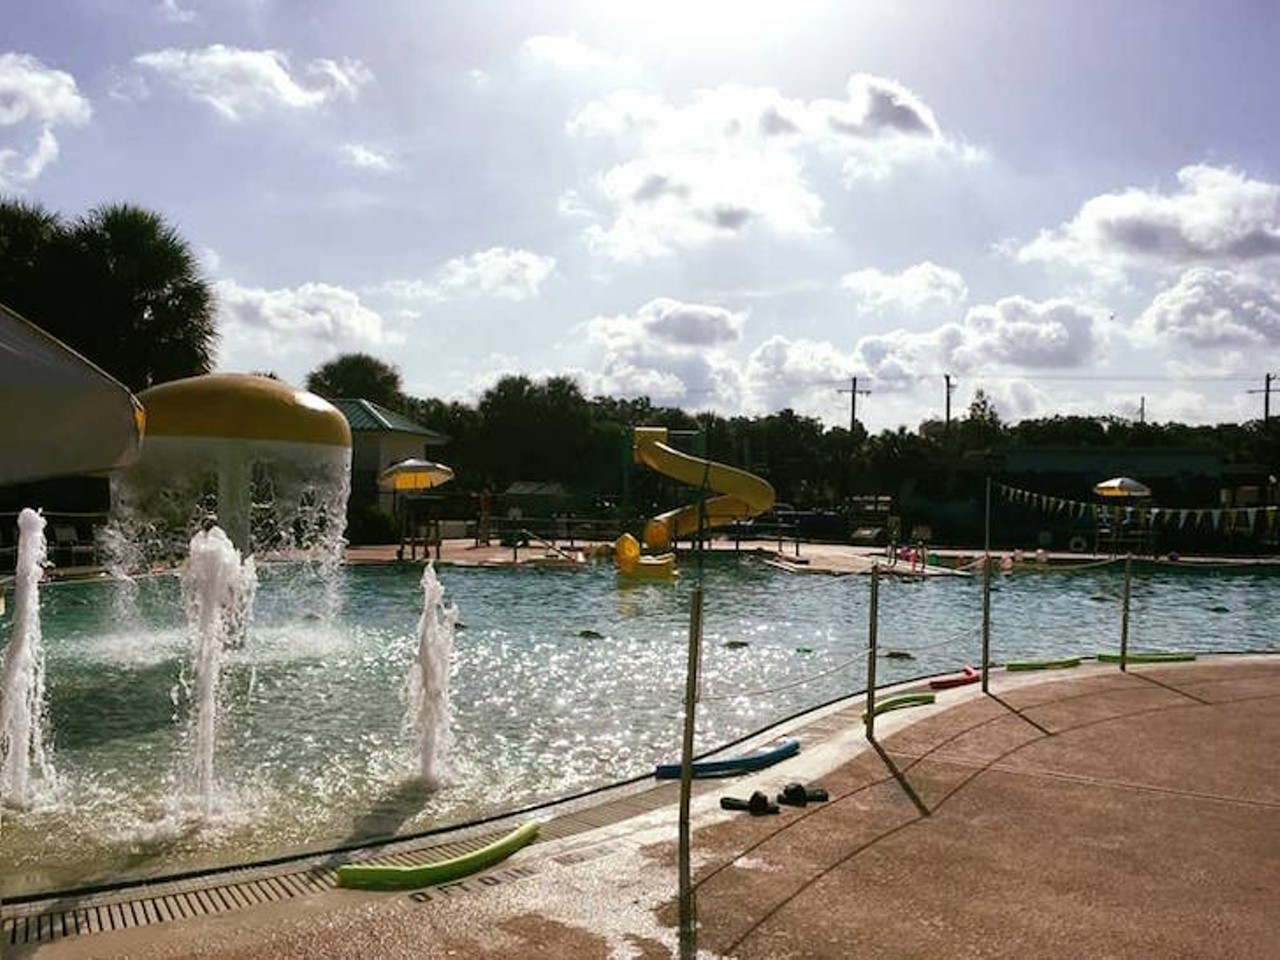 Sulphur Springs Pool and Park 
701 E Bird St, 33604, (813) 931-2156
Price: free    
This large family pool features four 25-yard lap lanes, zero depth entry, splash pad, and many water slides; and it sits right next to Sulphur Springs historical park, right on the Hillsborough River. The City of Tampa website says that in the right conditions, manatees can be spotted. 
Photo via CARD-USF/Facebook